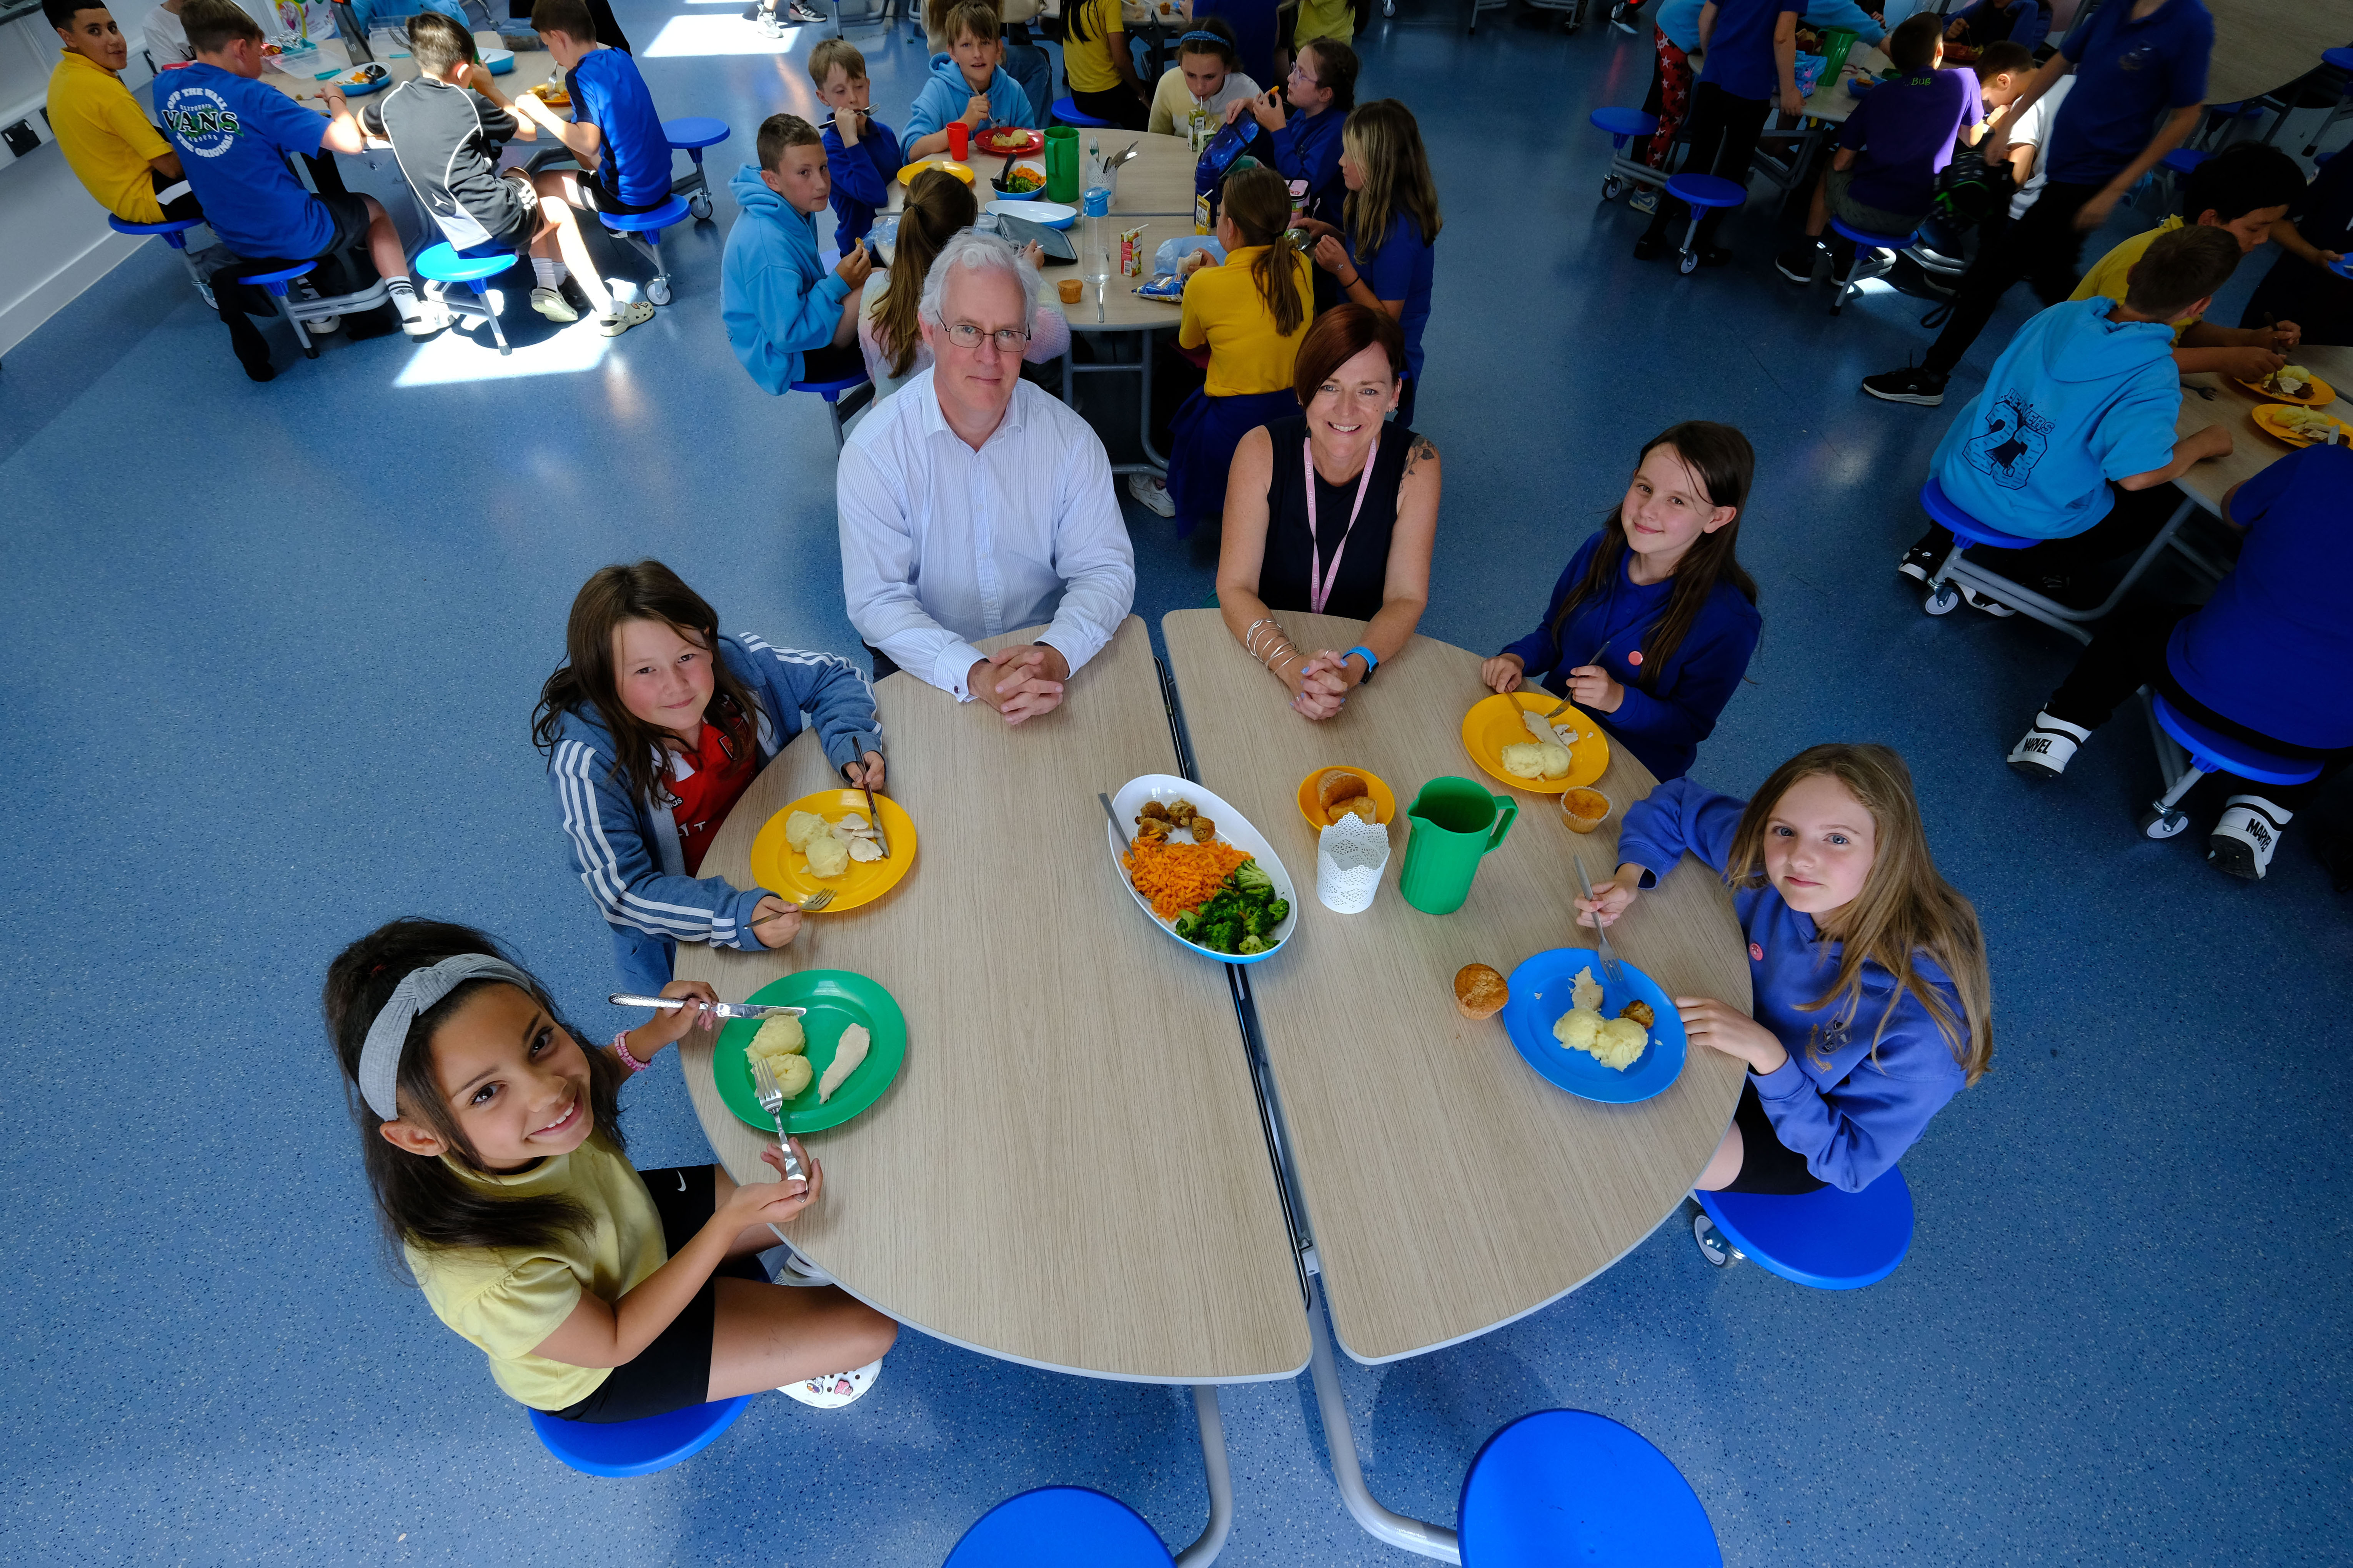 New-style lunchtimes introduced at Neyland School 